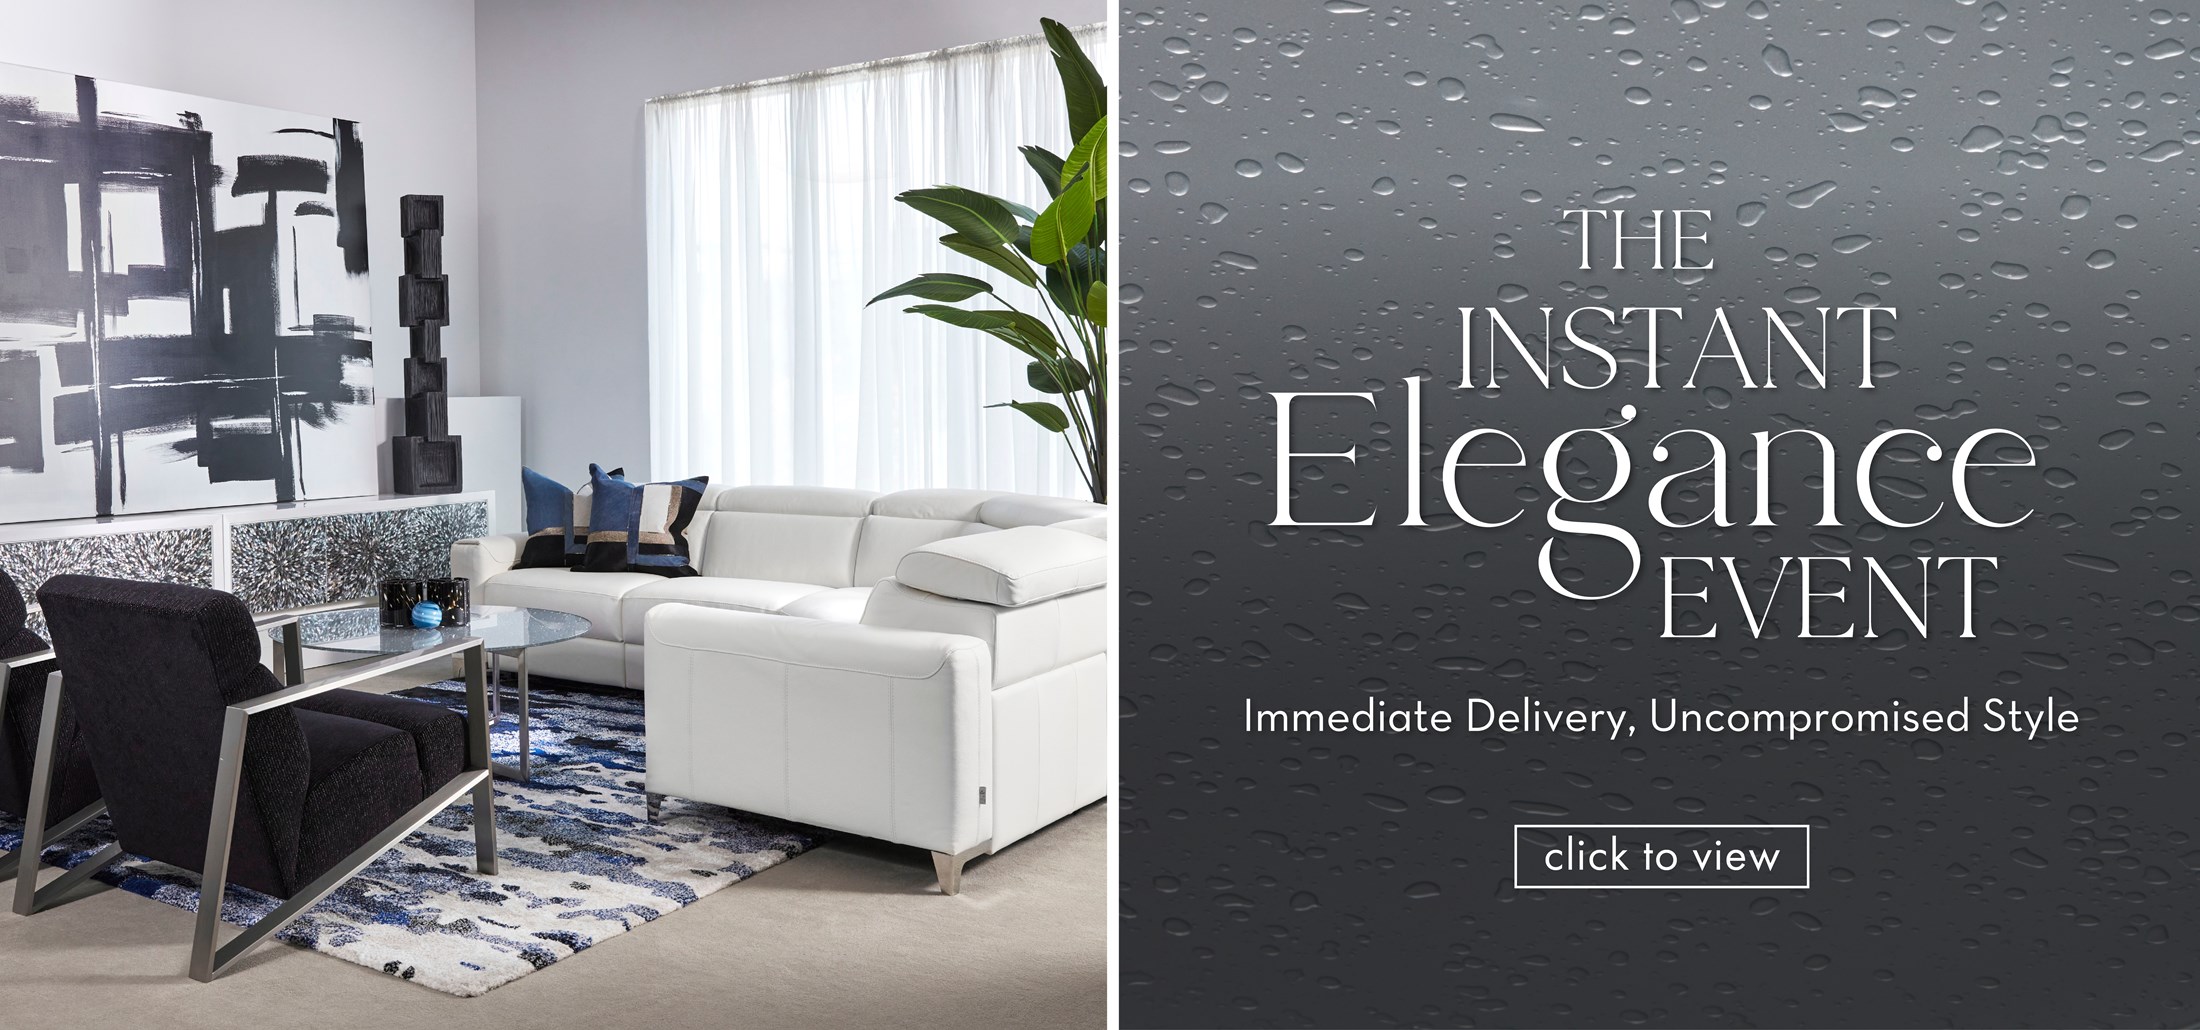 Image of a sectional and two chairs with blue and black accessories. Text: The Instant Elegance Event. Immediate Delivery, Uncompromised Style. Click to view. Links to The Instant Elegance Event. 